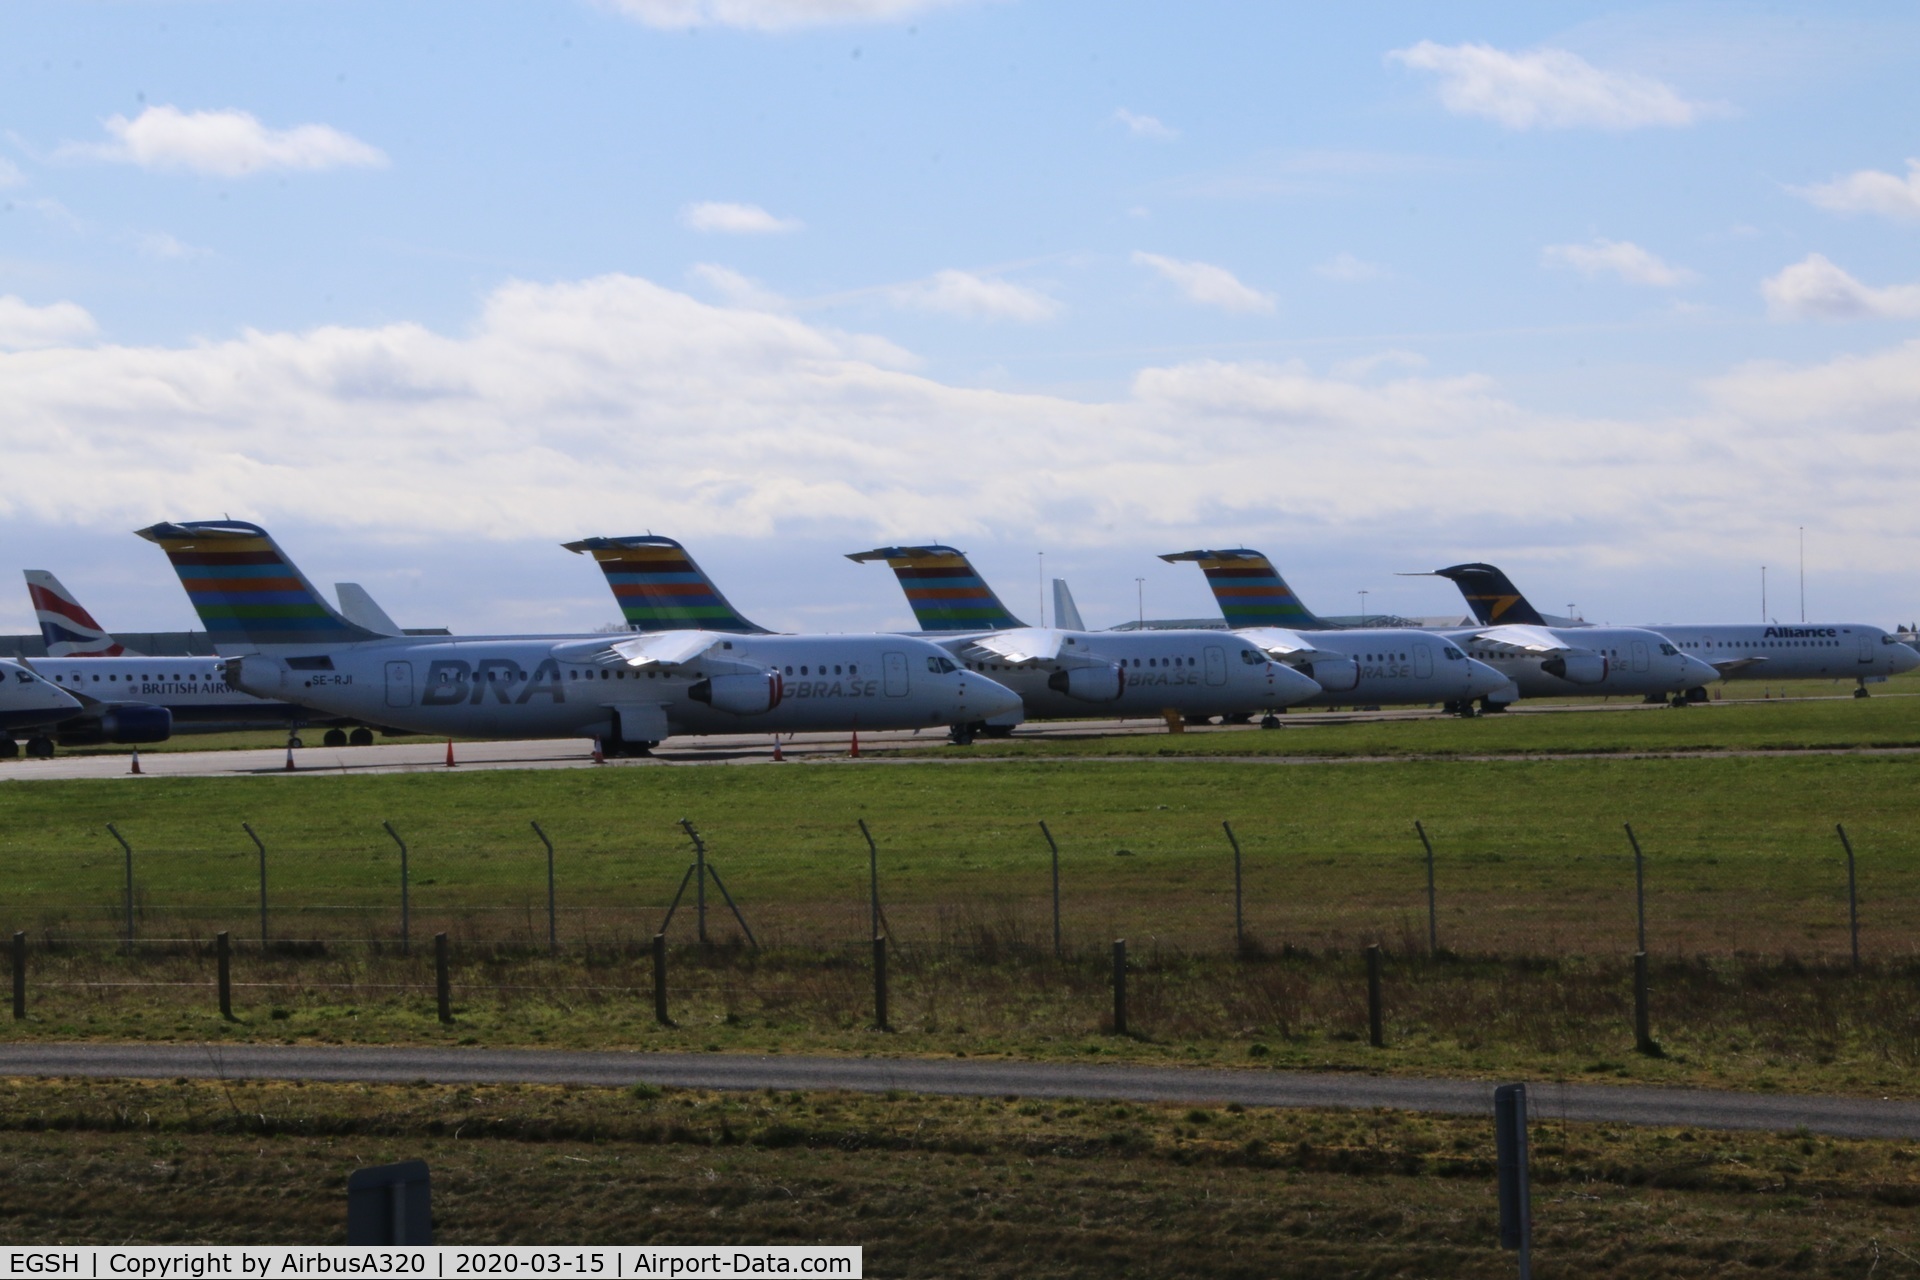 Norwich International Airport, Norwich, England United Kingdom (EGSH) - Braathens Regional have started to retired the Avro fleet and Norwich have gained 4 so far, here we see 
SE-RJI, SE-DSV, SE-DSU, SE-DJN (at the back)